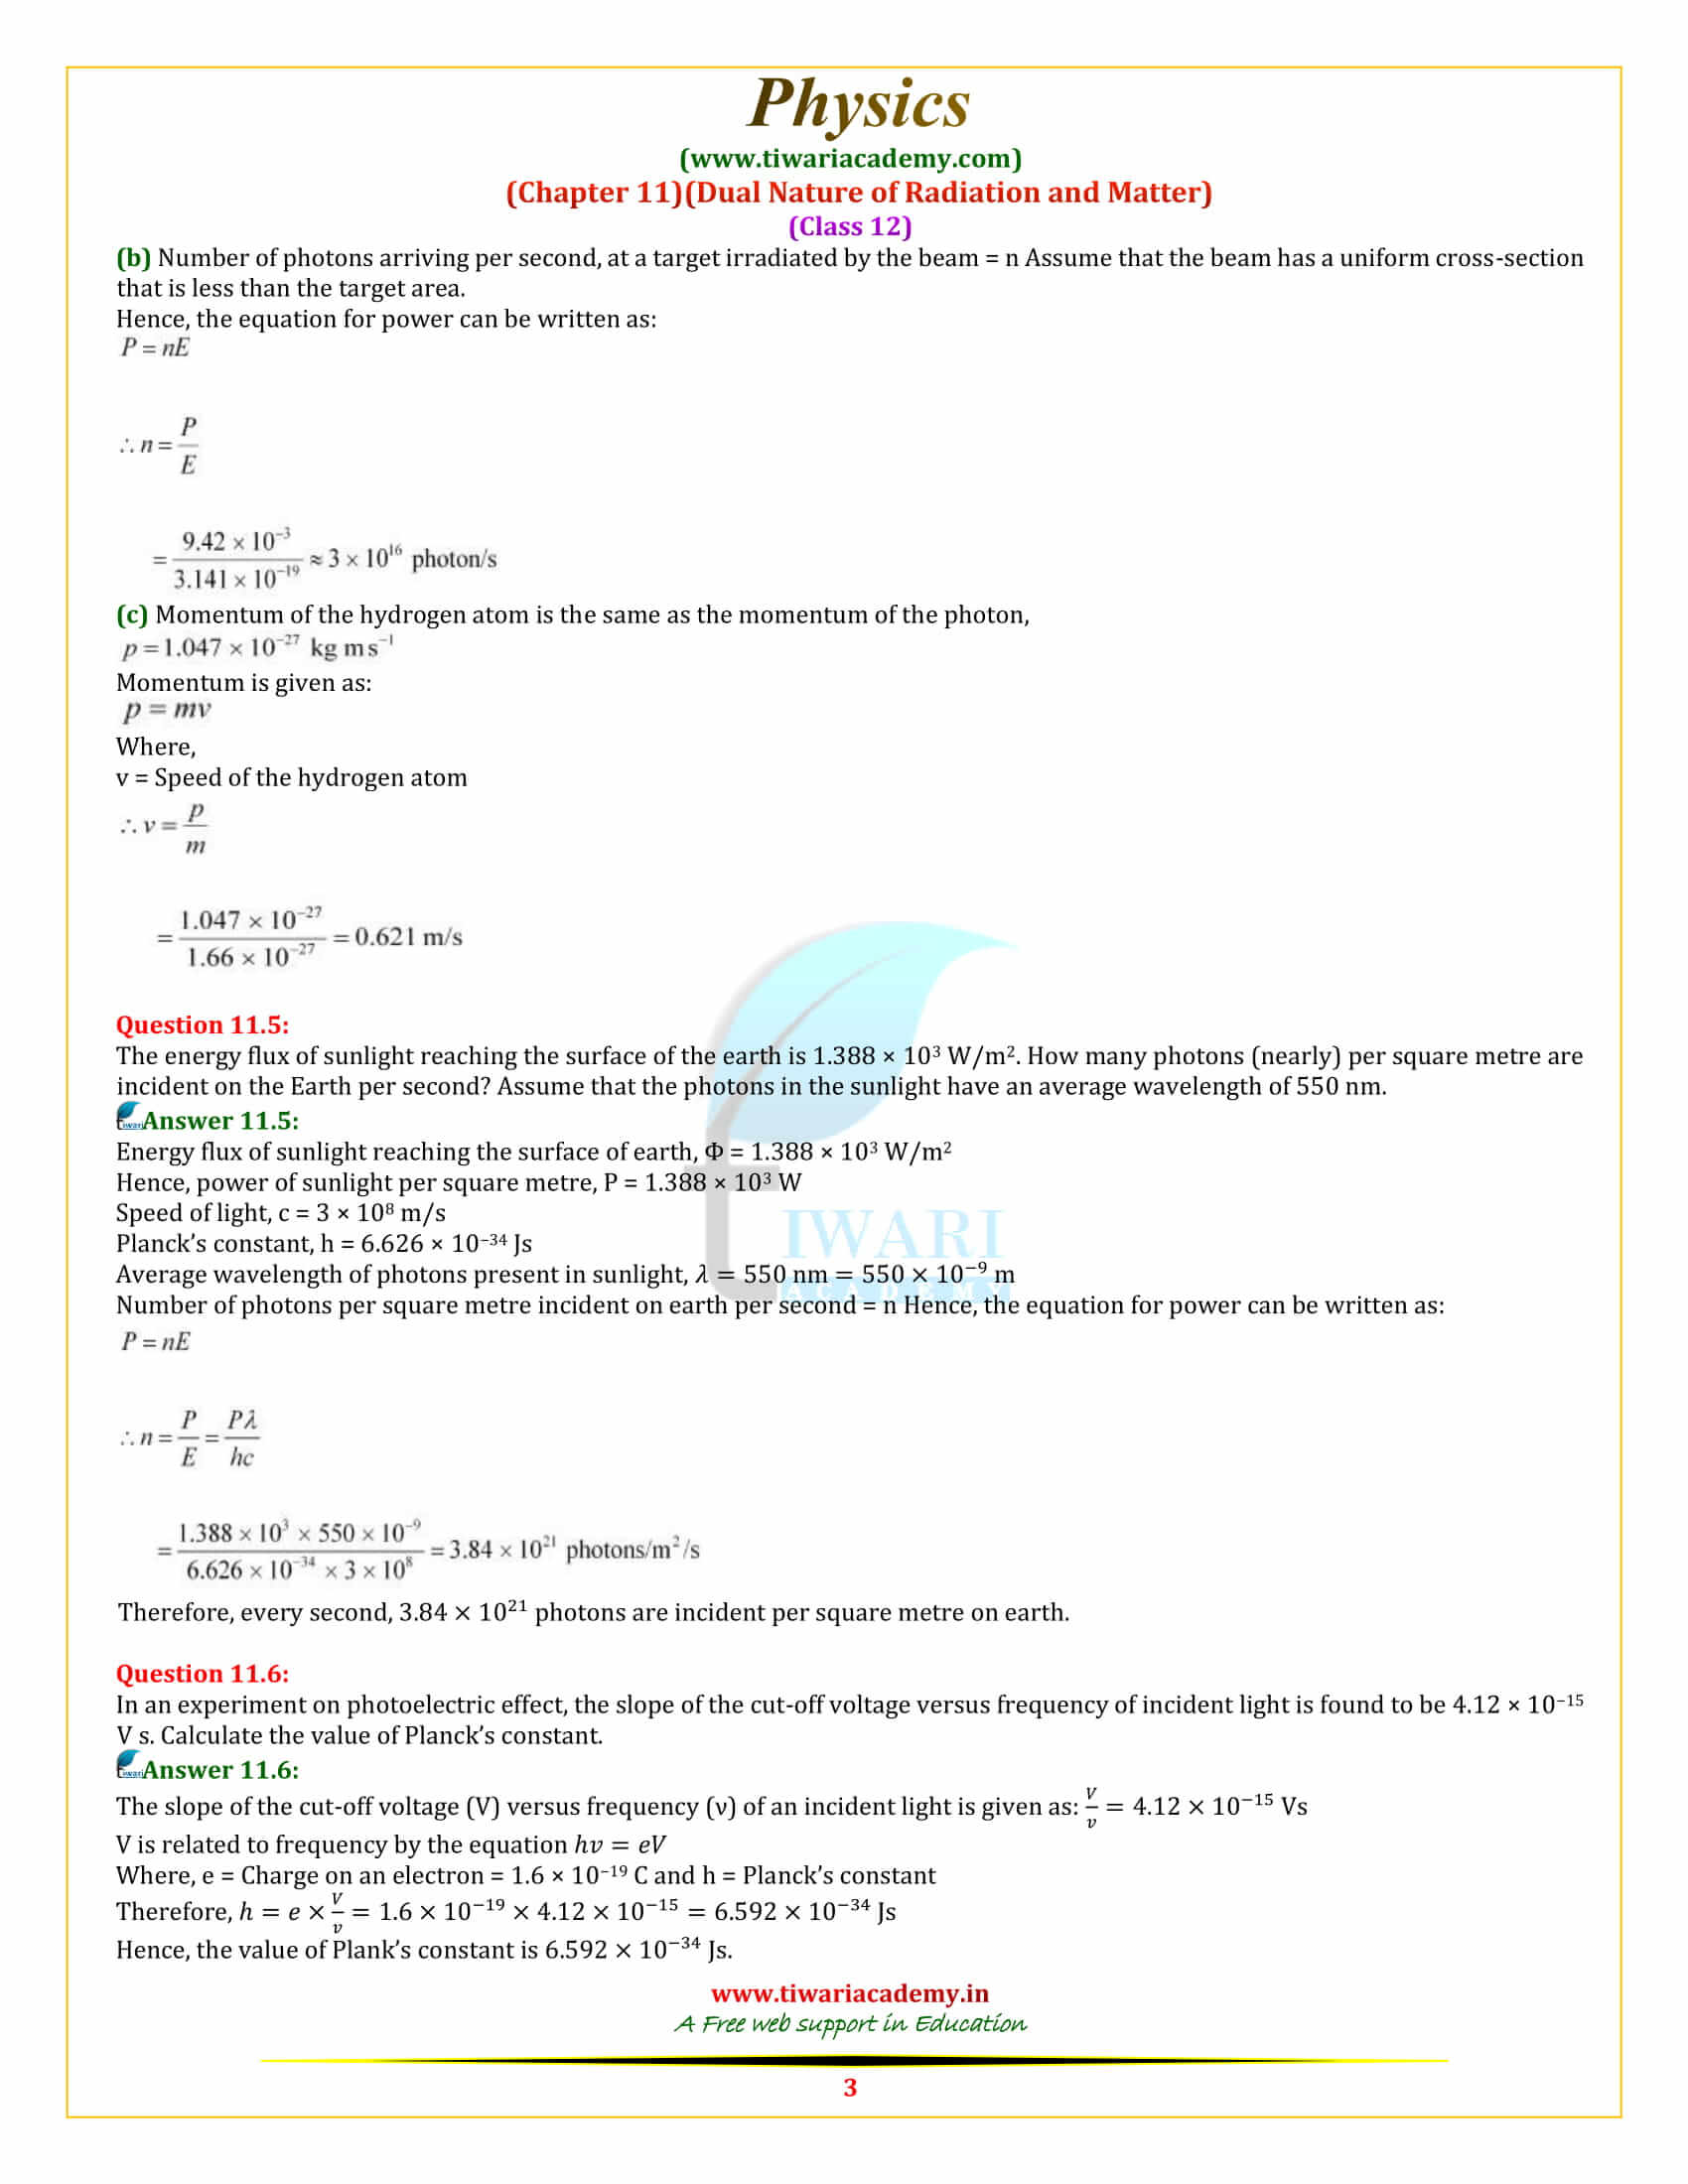 NCERT Solutions for Class 12 Physics Chapter 11 Dual Nature of Radiation and Matter free download